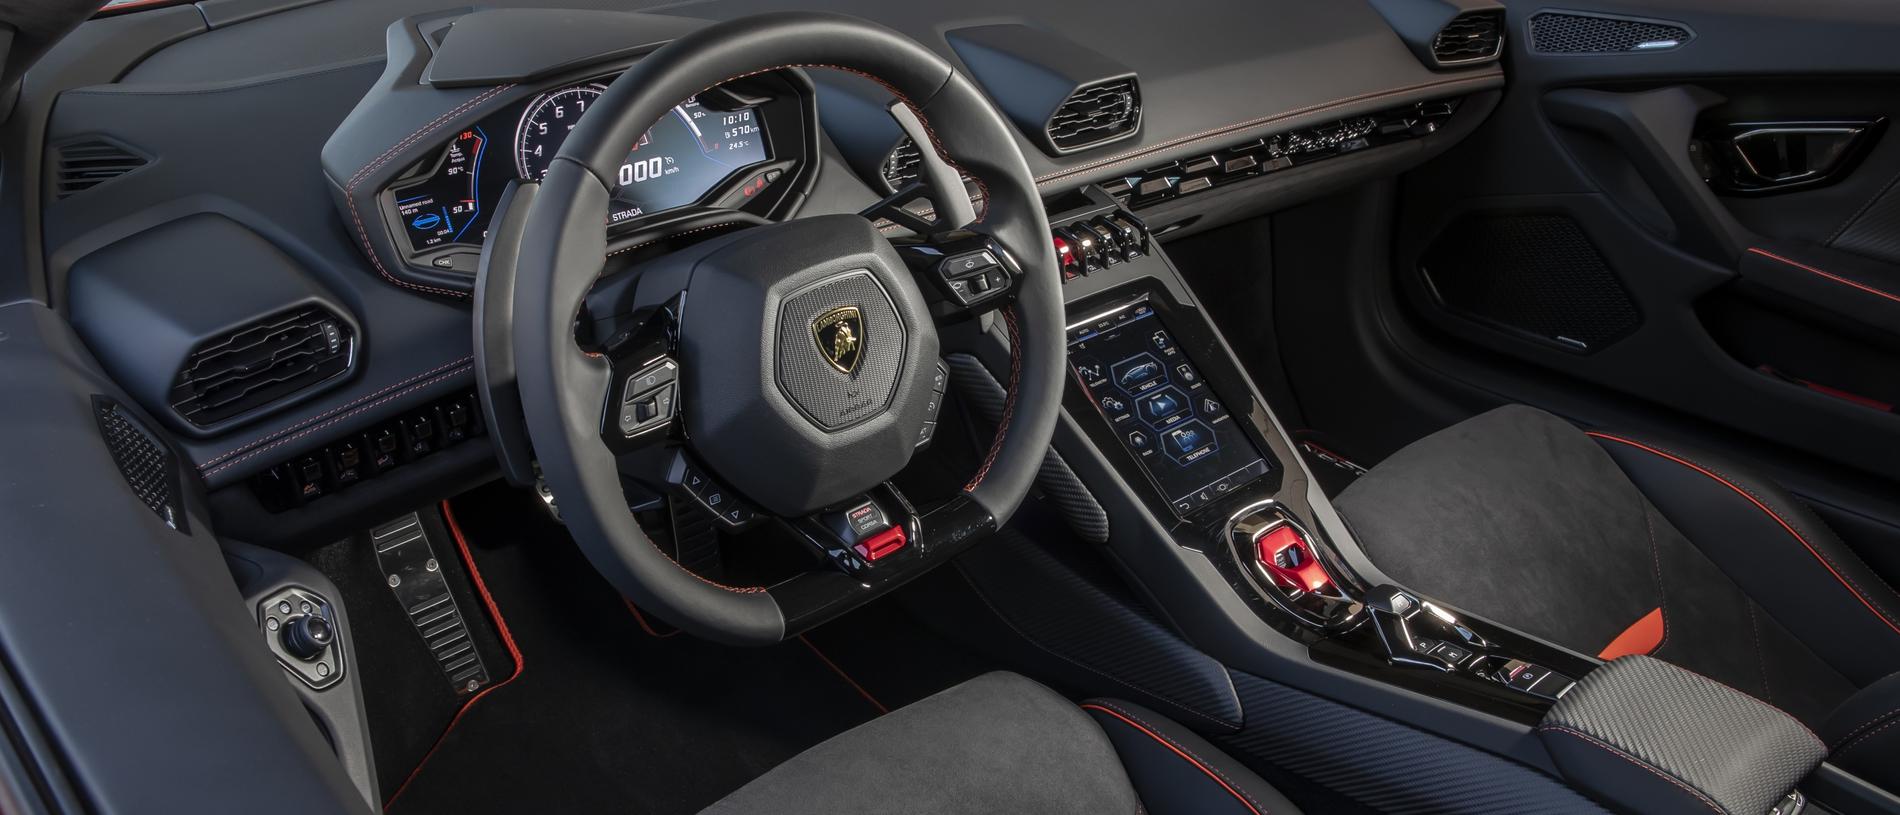 Huracan cabin: Beautiful styling, snug seats — and race-car look and feel to the dash